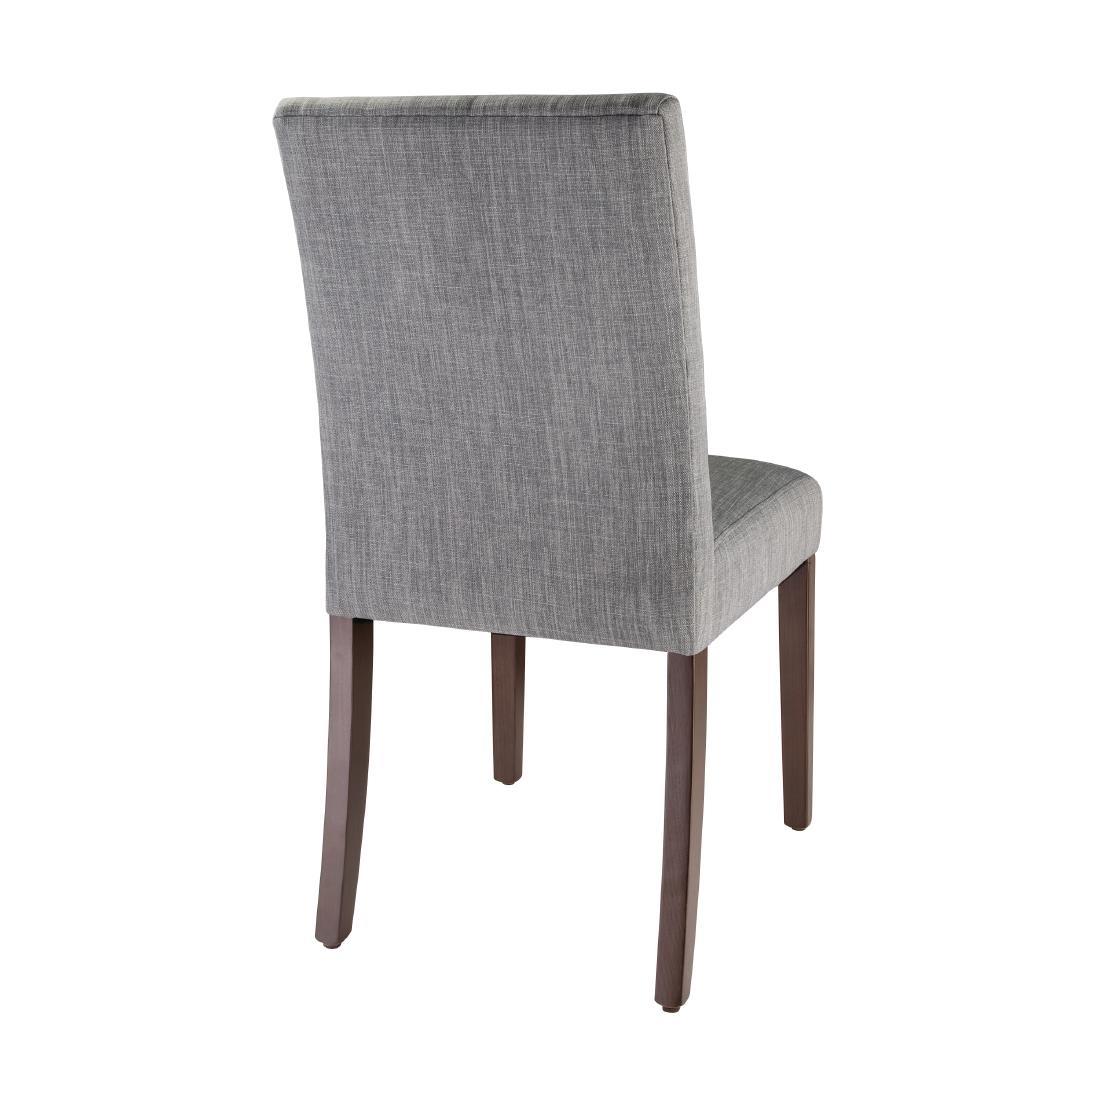 Bolero Chiswick Dining Chairs Charcoal Grey (Pack of 2) - DT696  - 3